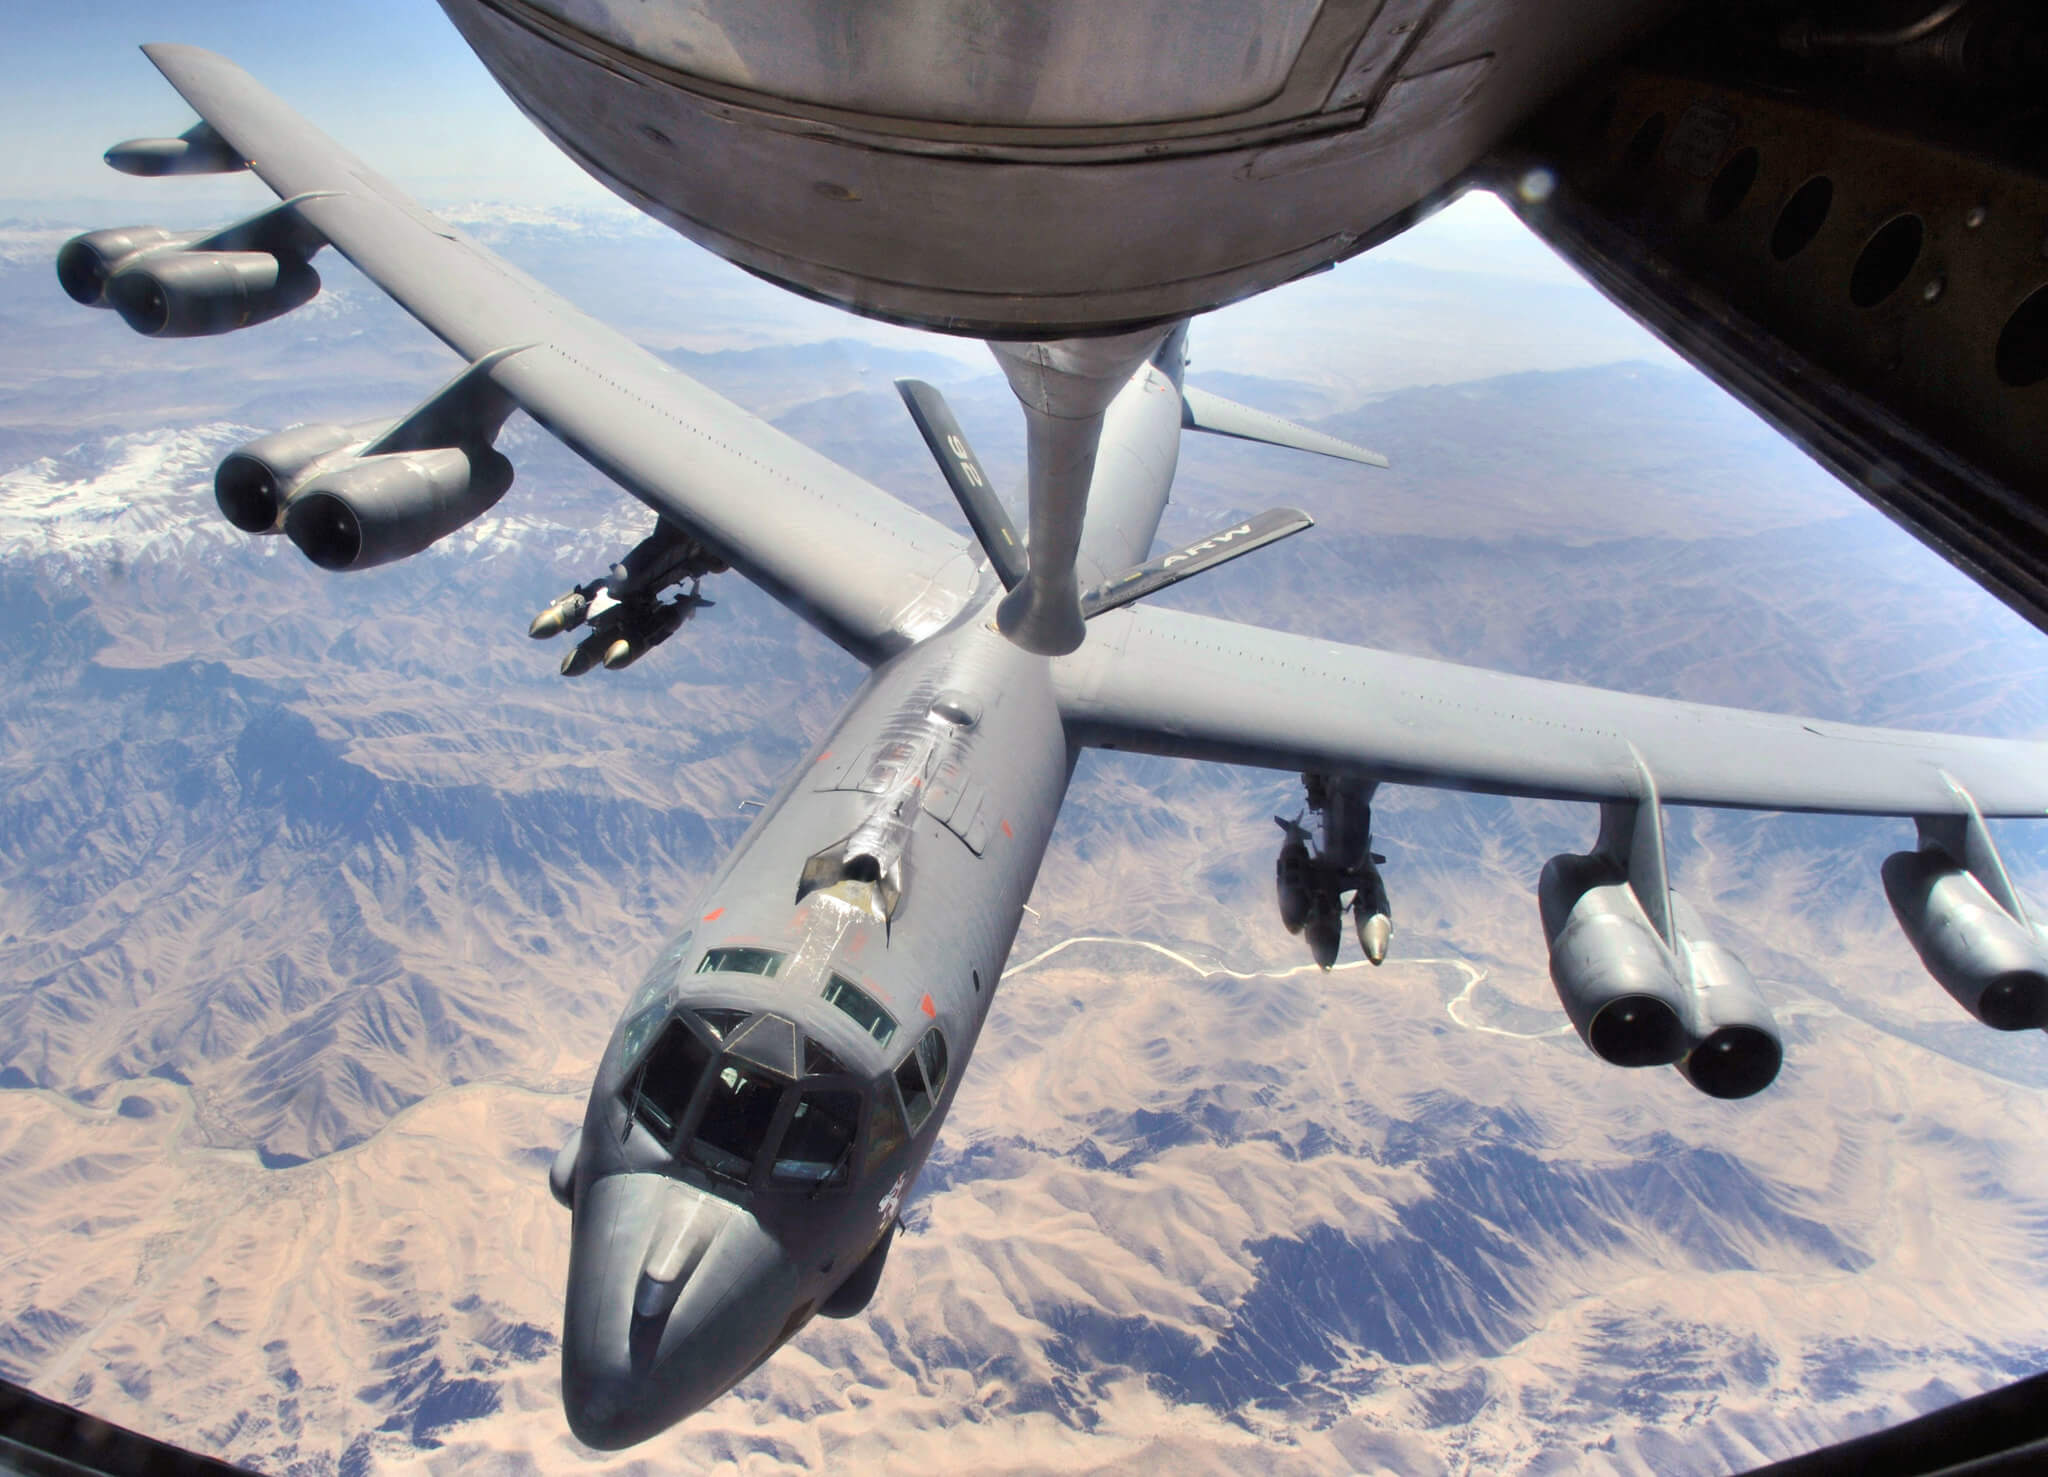 DeKlerk-An American B-52H Stratofortress bomber in a refueled position over Afghanistan in 2006. Lance Cheung-Flickr